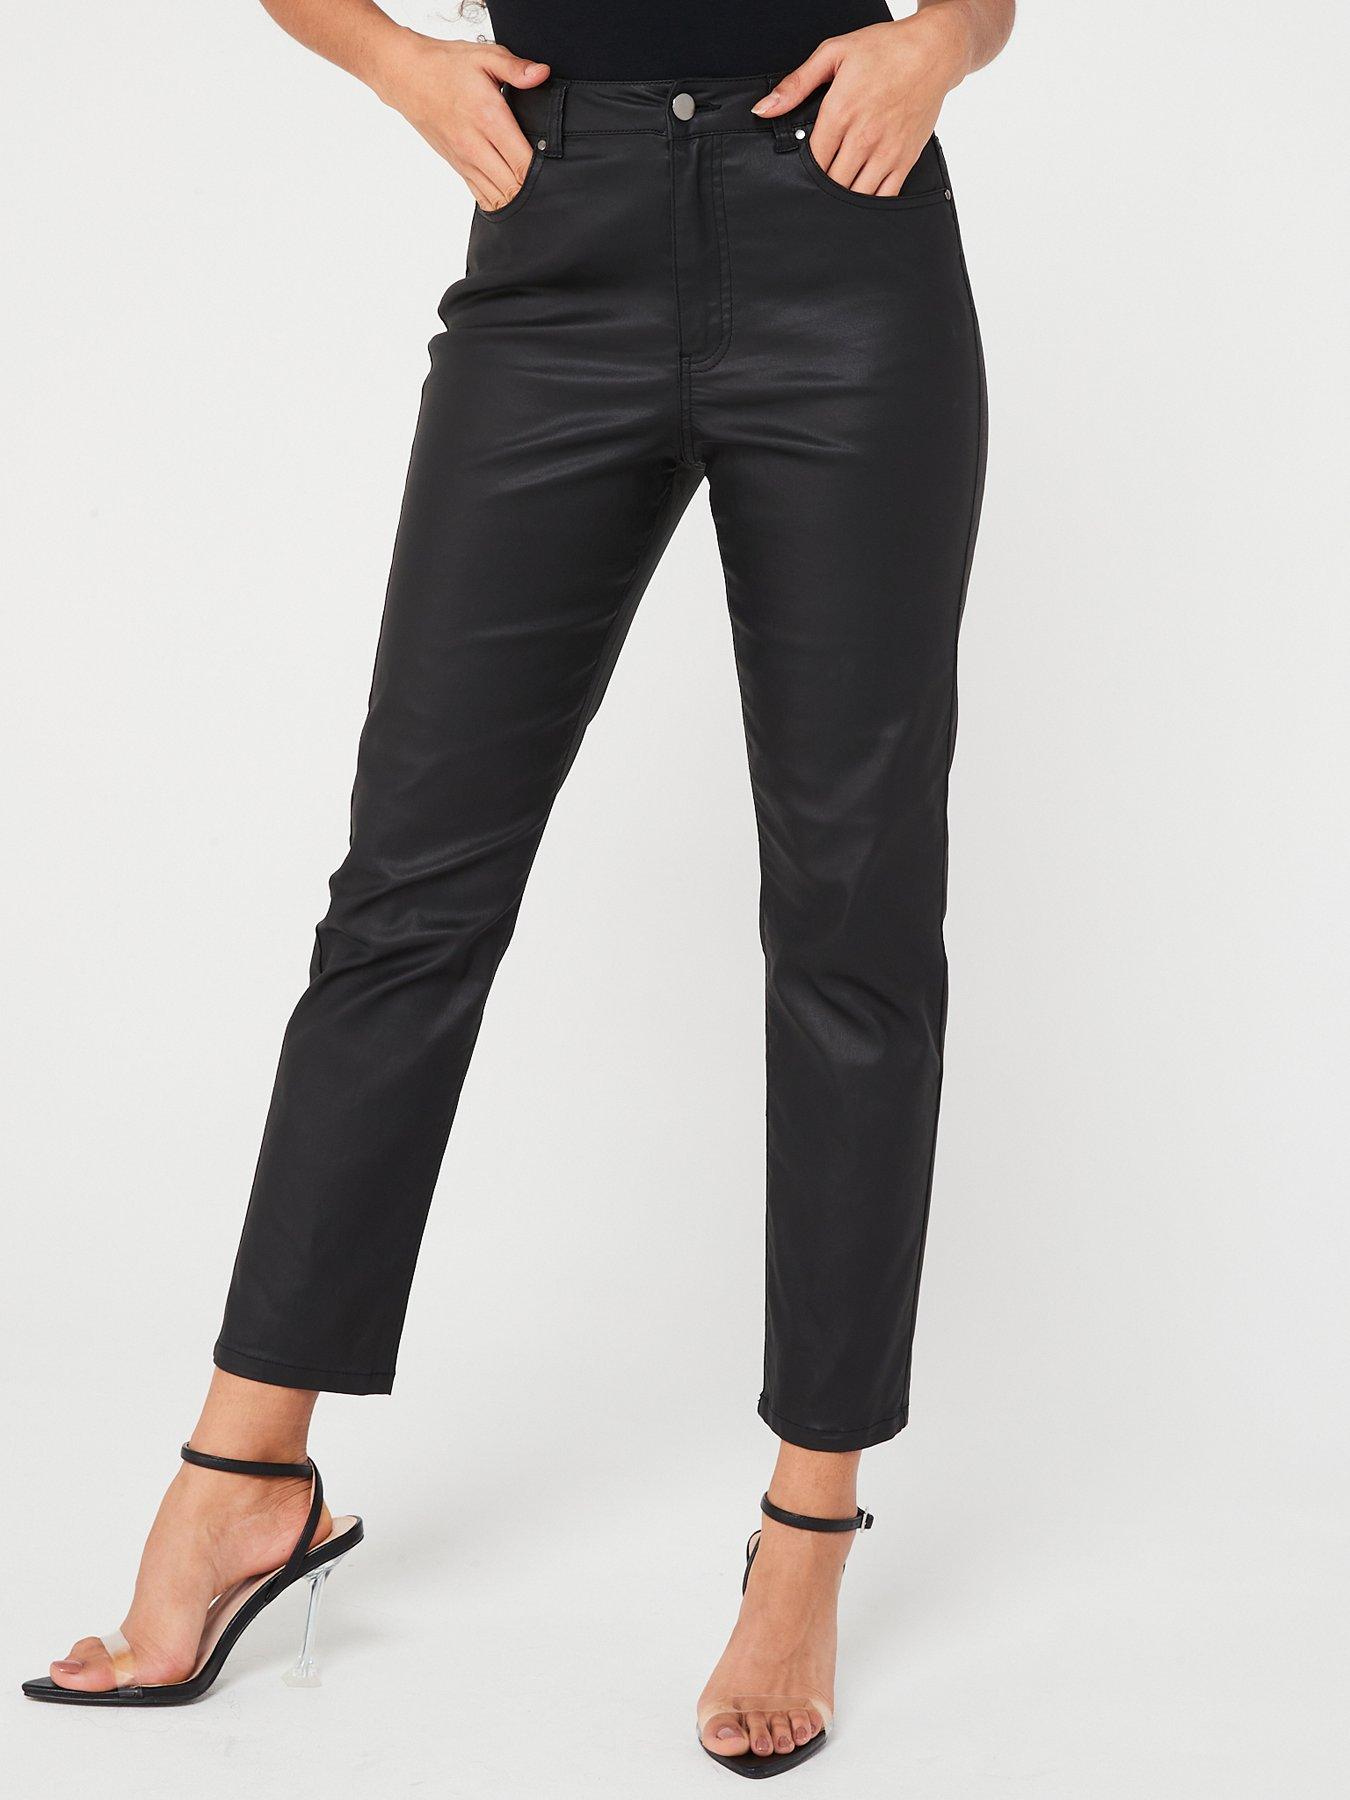 New Look Mink Coated Leather-Look Mid Rise Lift & Shape Emilee Jeggings